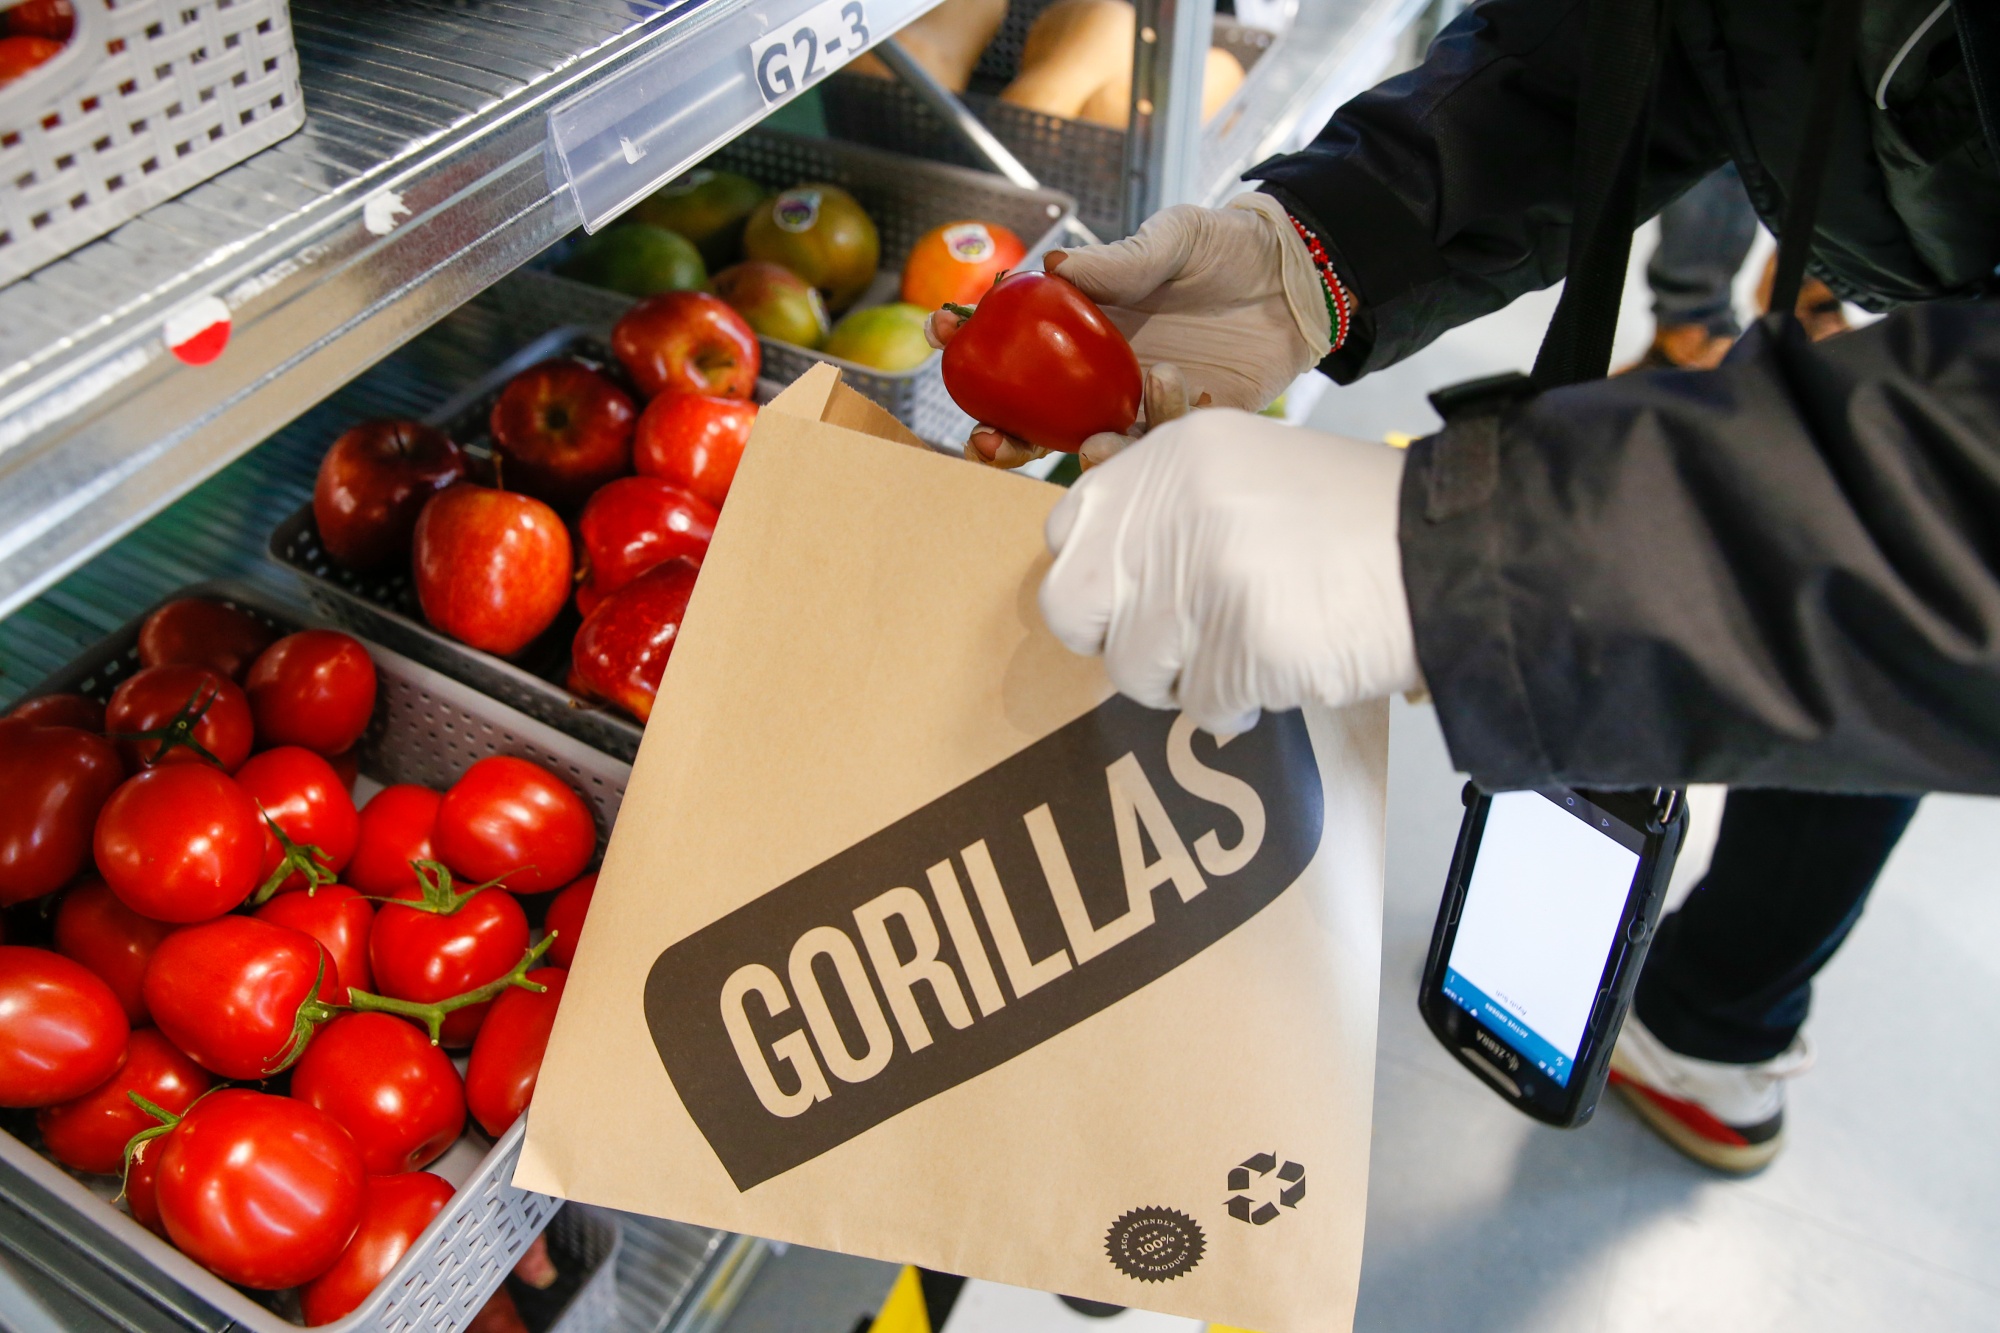 Gorillas is among the largest companies that deliver groceries and other goods within minutes.